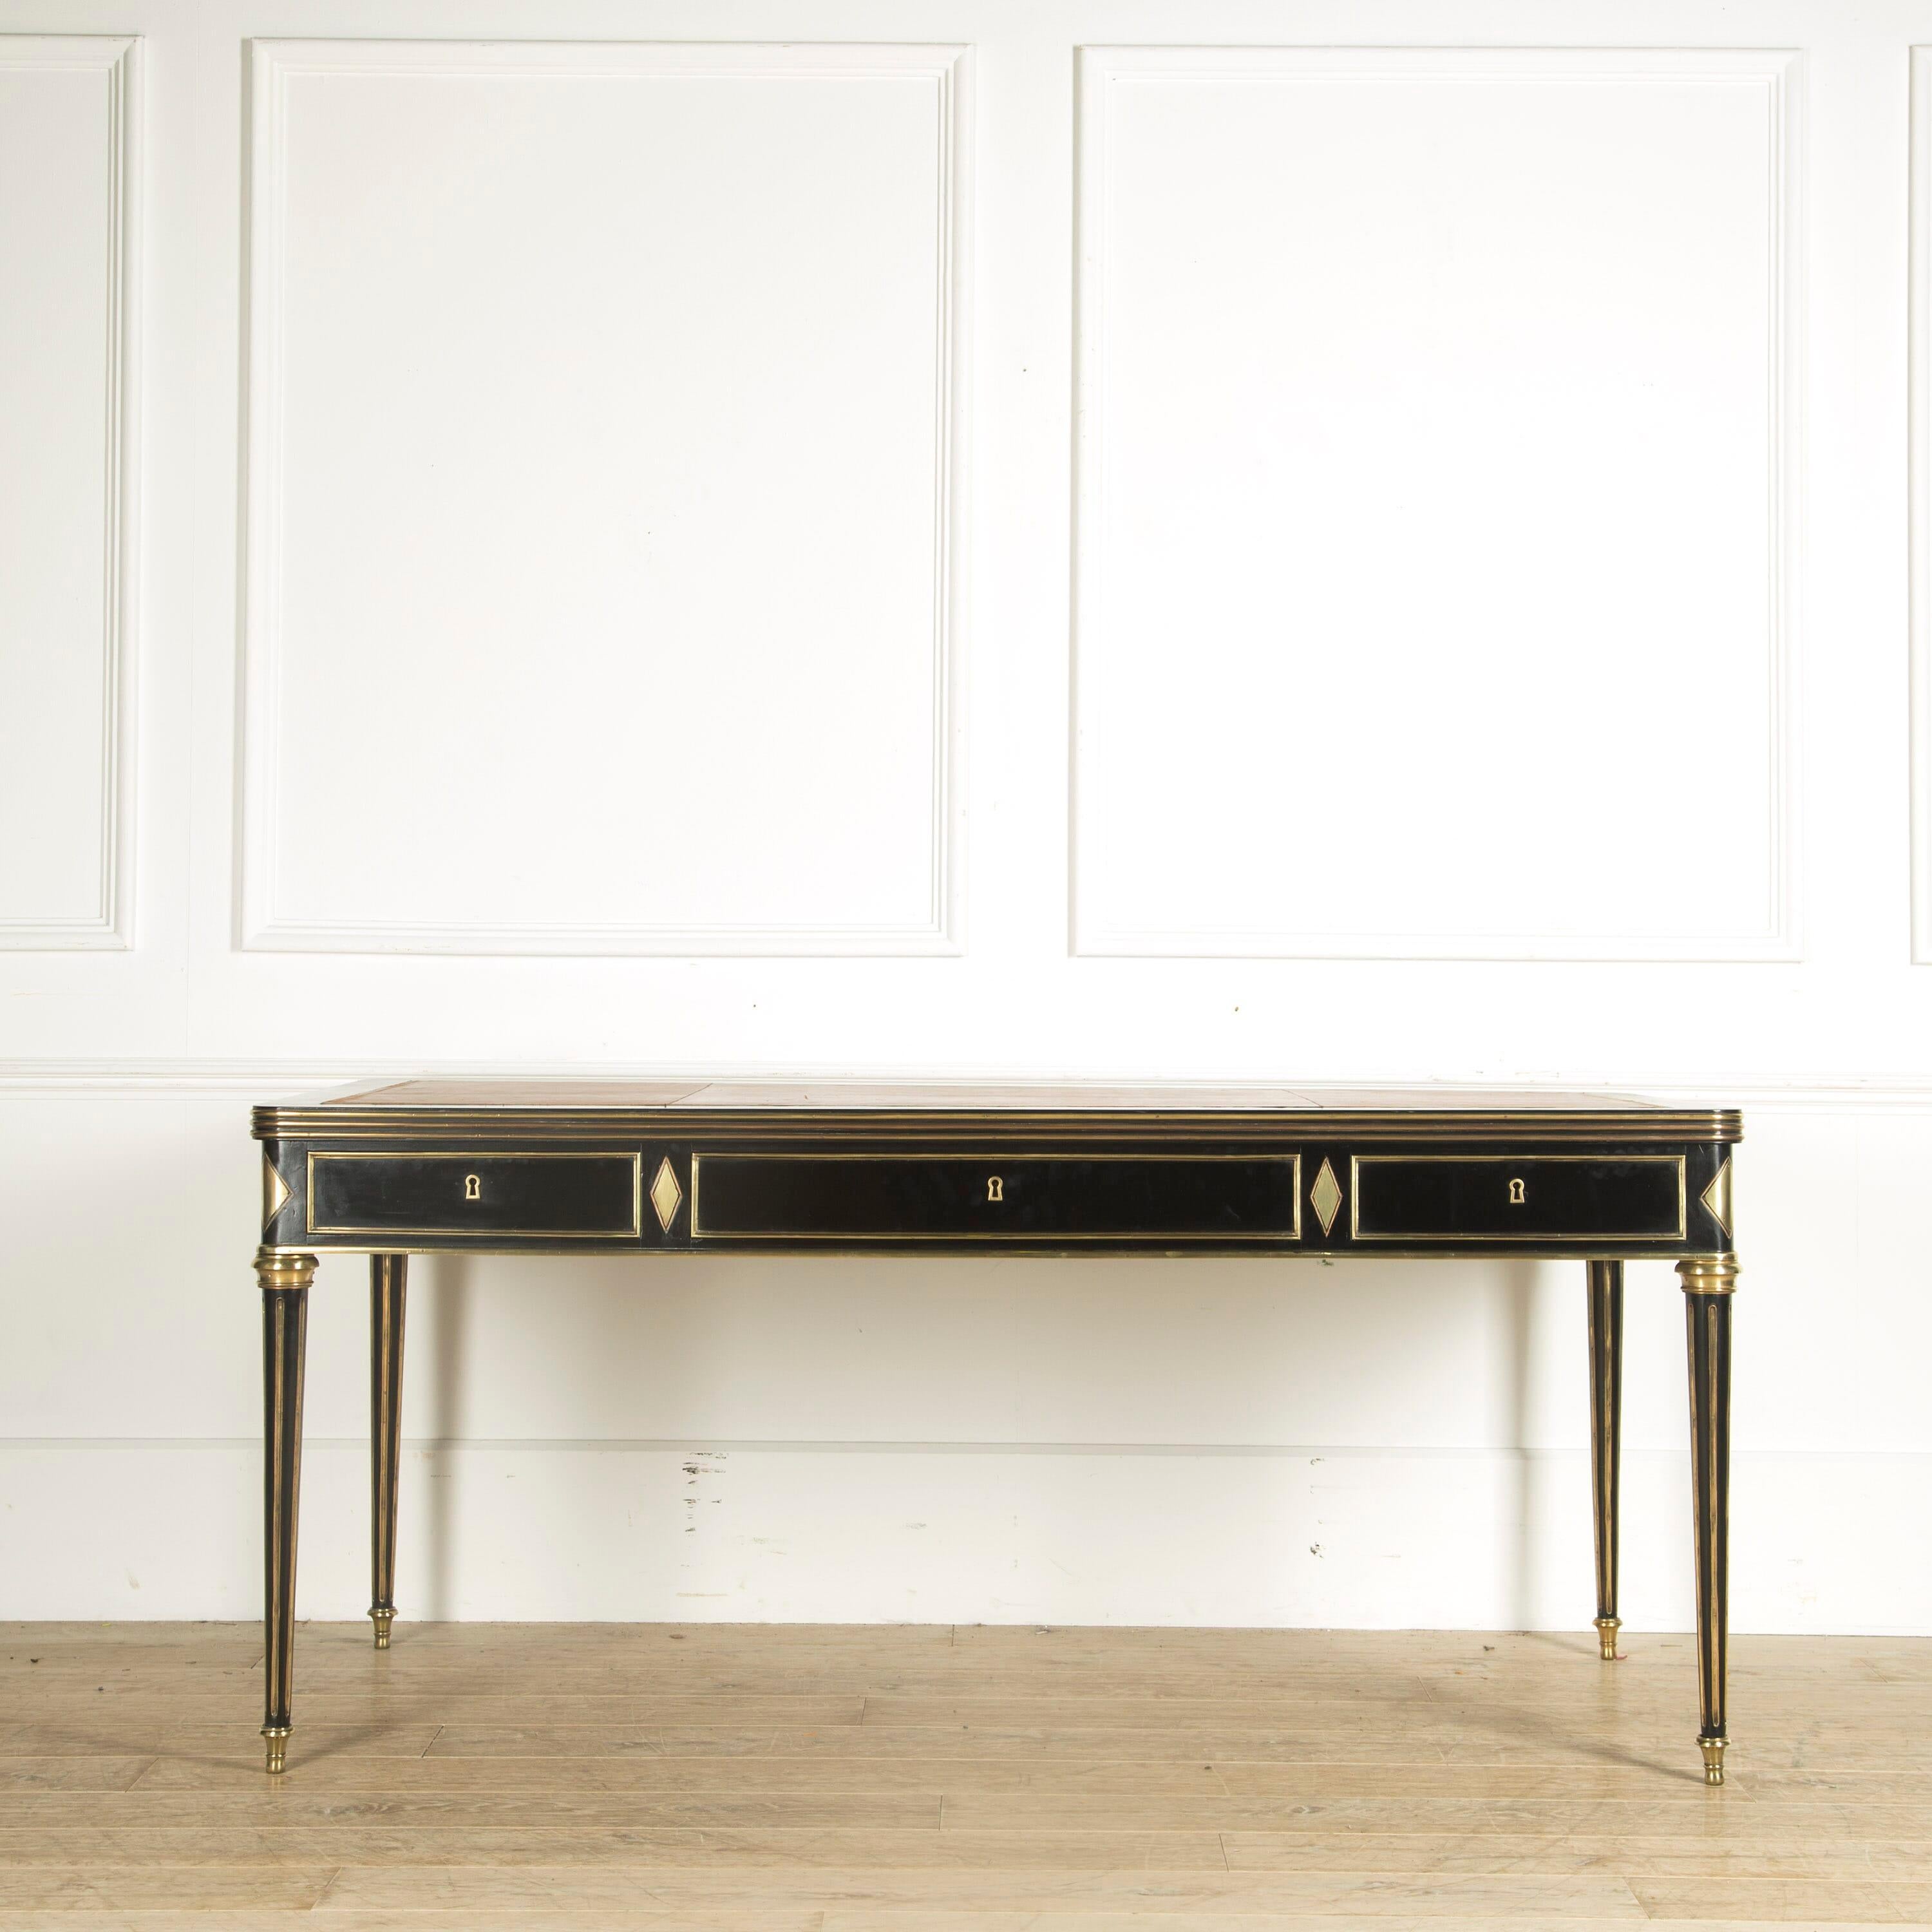 A mid-20th century French ebonized and brass-mounted bureau plat of the style and quality associated with Maison Jansen manufacture during this period. France, circa 1960.